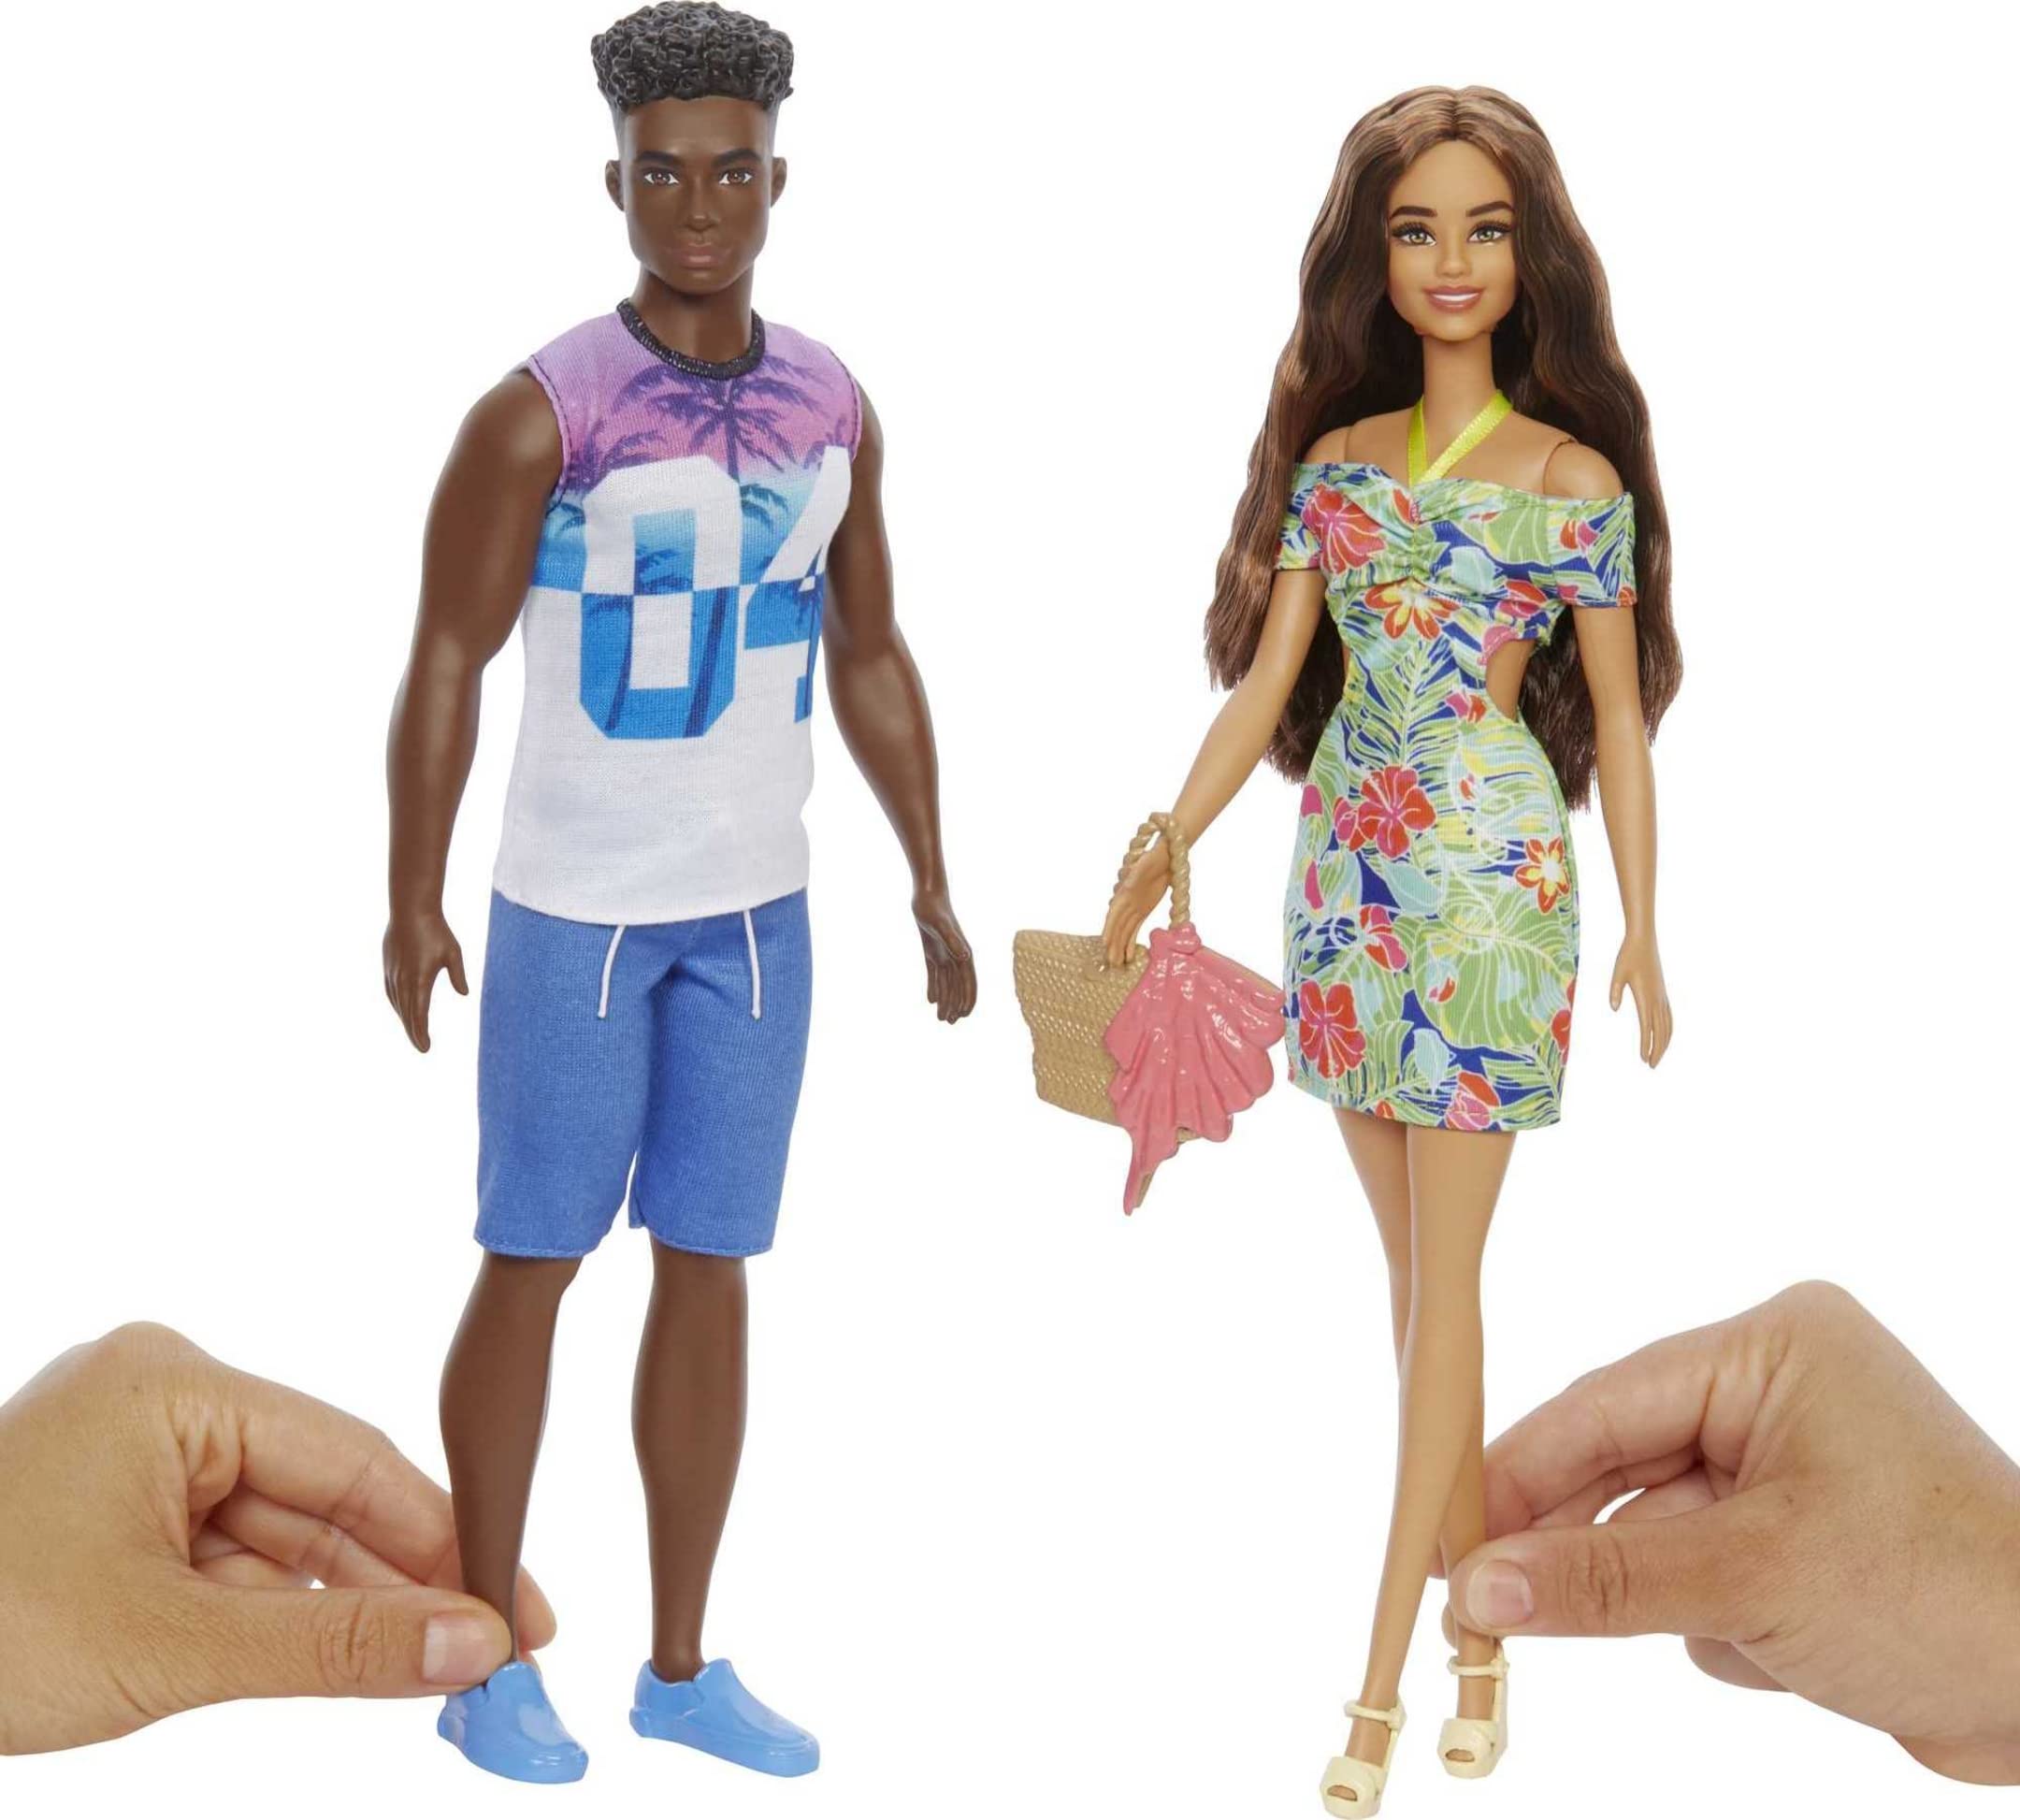  Barbie Clothes, Fashion and Accessory 2-Pack for